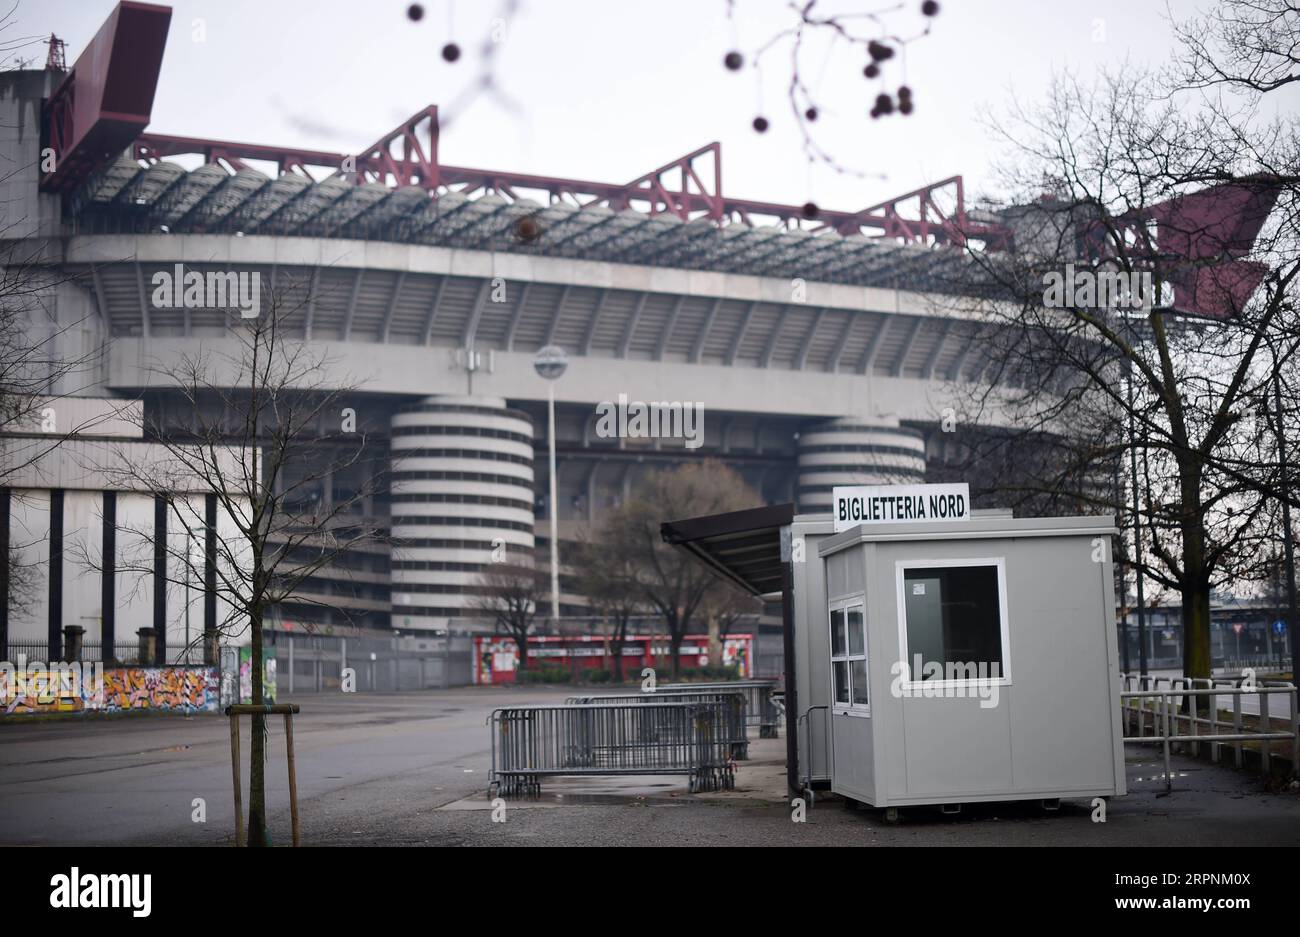 200302 -- MILAN, March 2, 2020 Xinhua -- General view is seen outside the San Siro stadium after a Serie A soccer match between AC Milan and Genoa was postponed due to the recent coronavirus outbreak in Milan, Italy, March 1, 2020. The number of Italians infected by the coronavirus continues to accelerate, Giovanni Rezza, head of the Italian High Institute of Health s Department of Infectious Diseases, said Sunday, adding that the country was at least a week away from seeing a peak in the outbreak. According to Angelo Borrelli, Civil Protection Department chief and Extraordinary Commissioner f Stock Photo